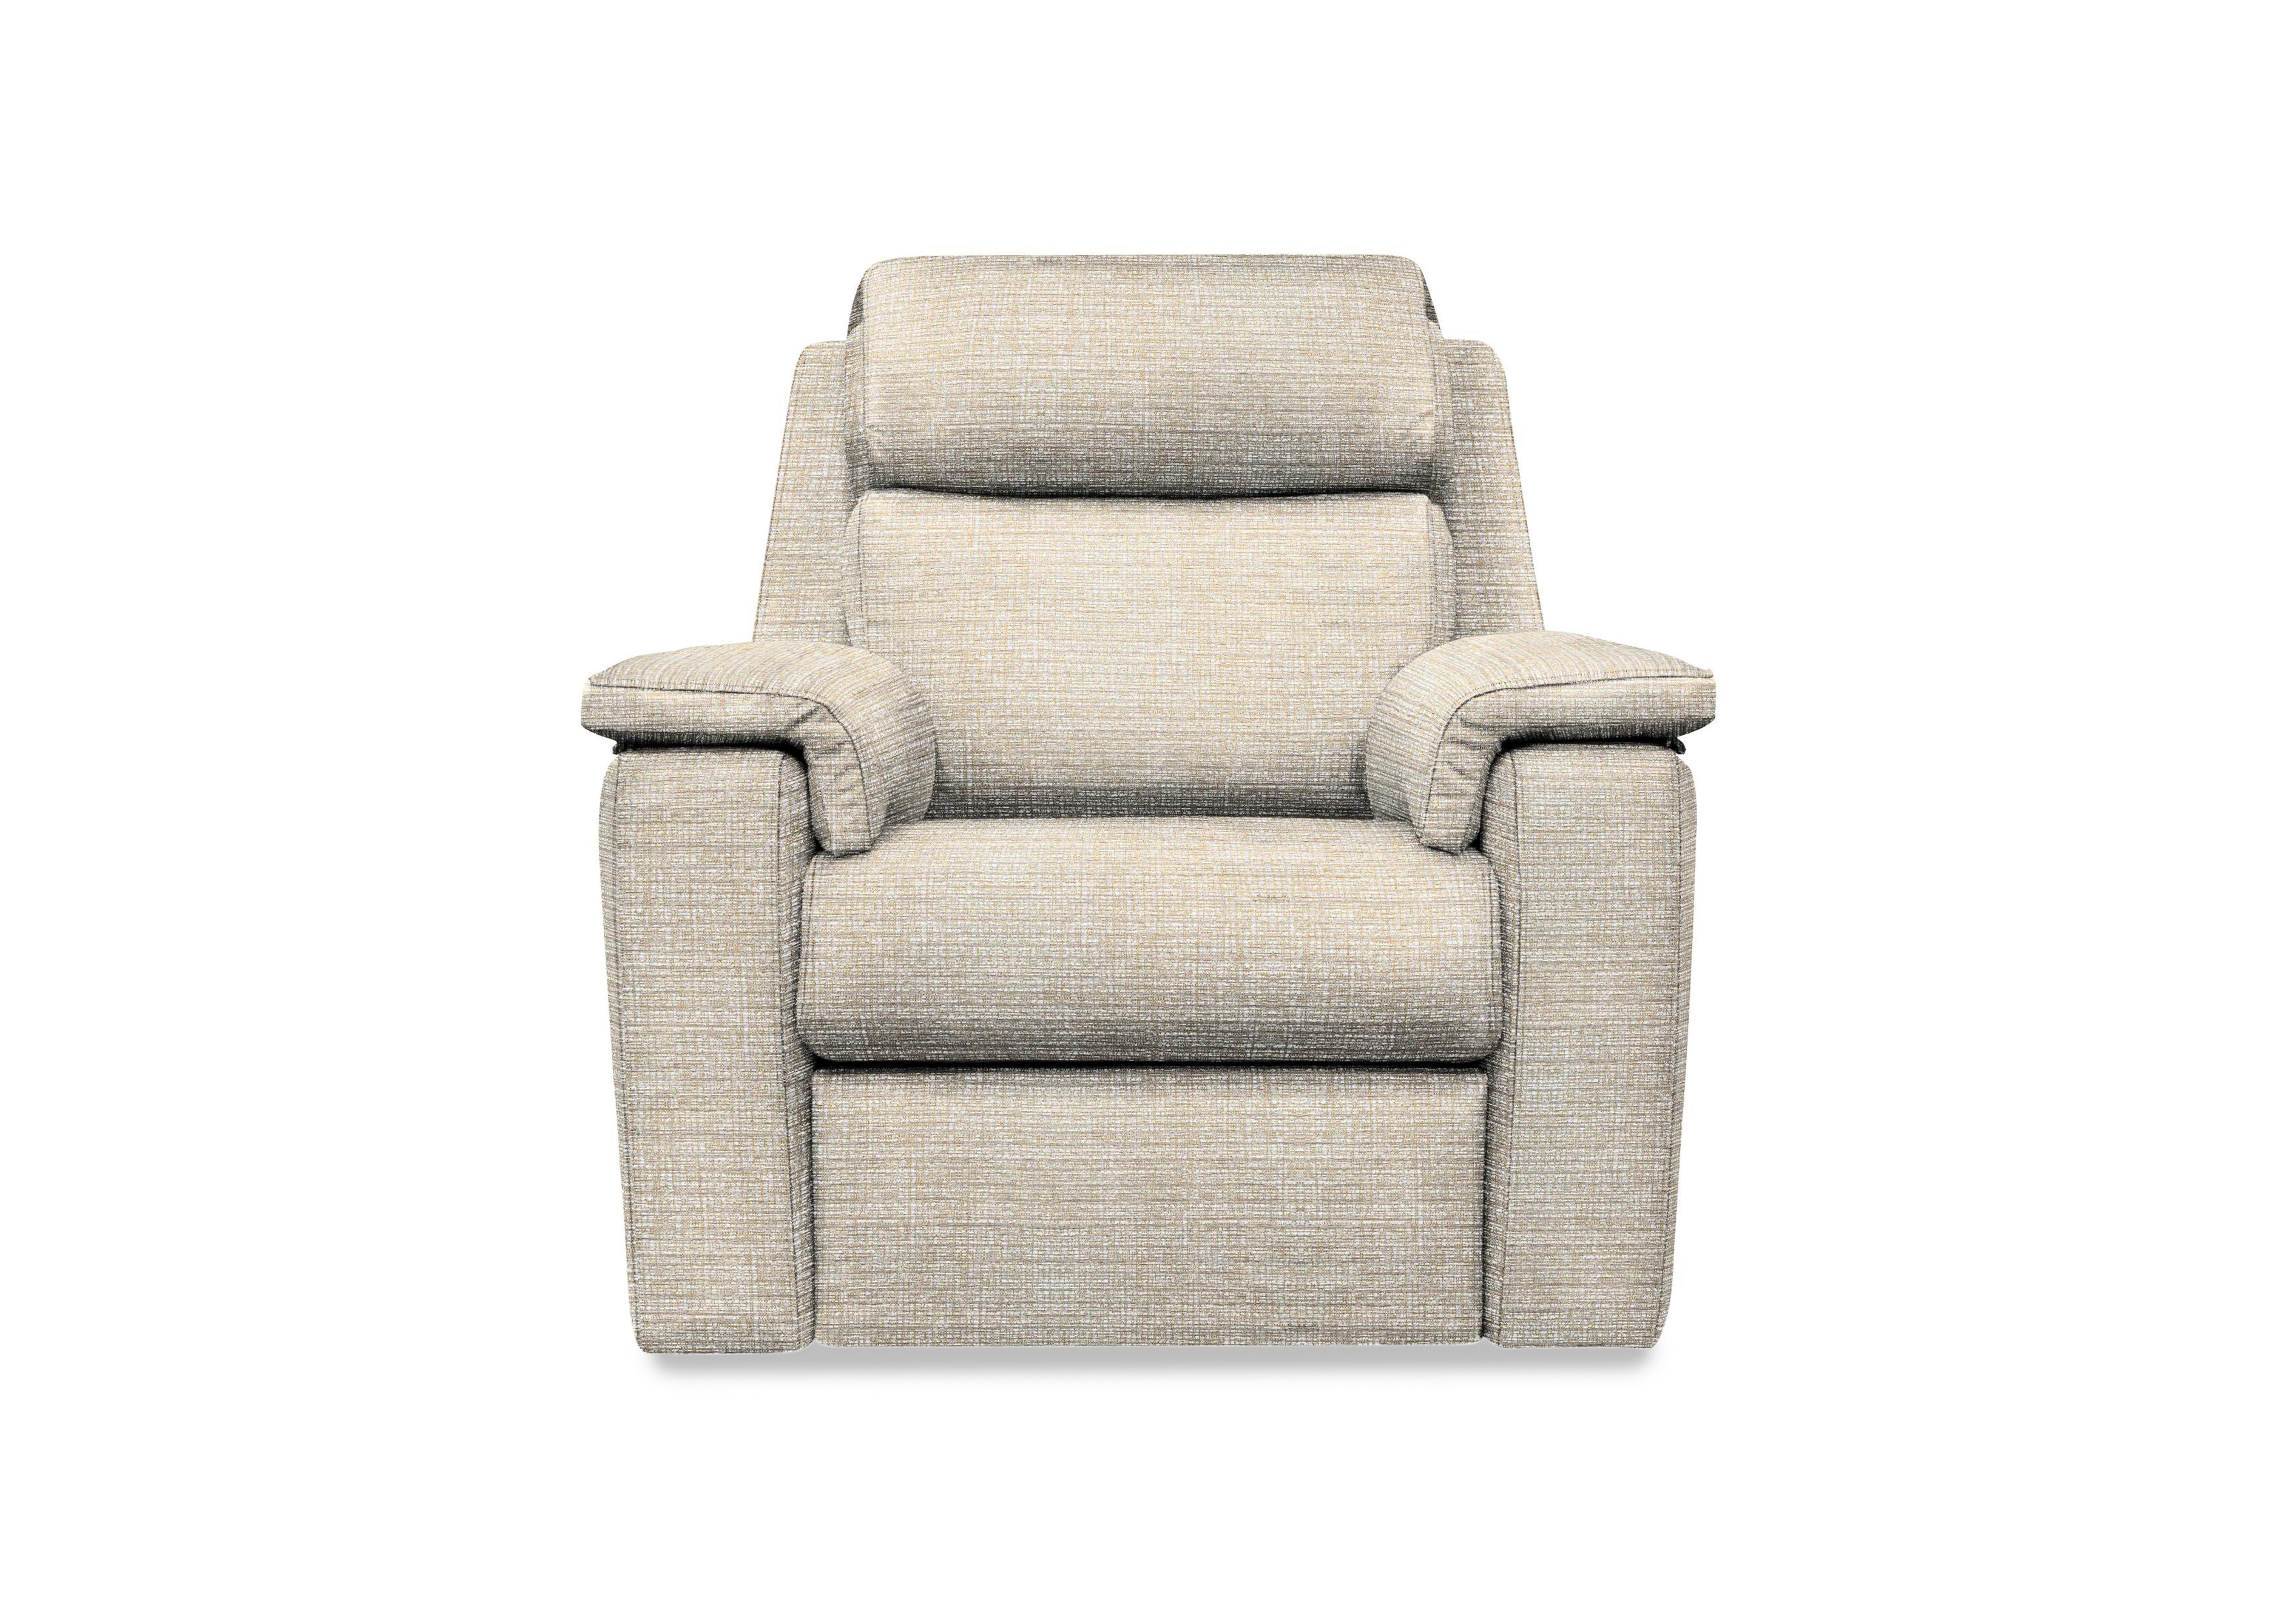 Thornbury Fabric Power Recliner Chair with Power Headrest and Power Lumbar in A006 Yarn Shale on Furniture Village